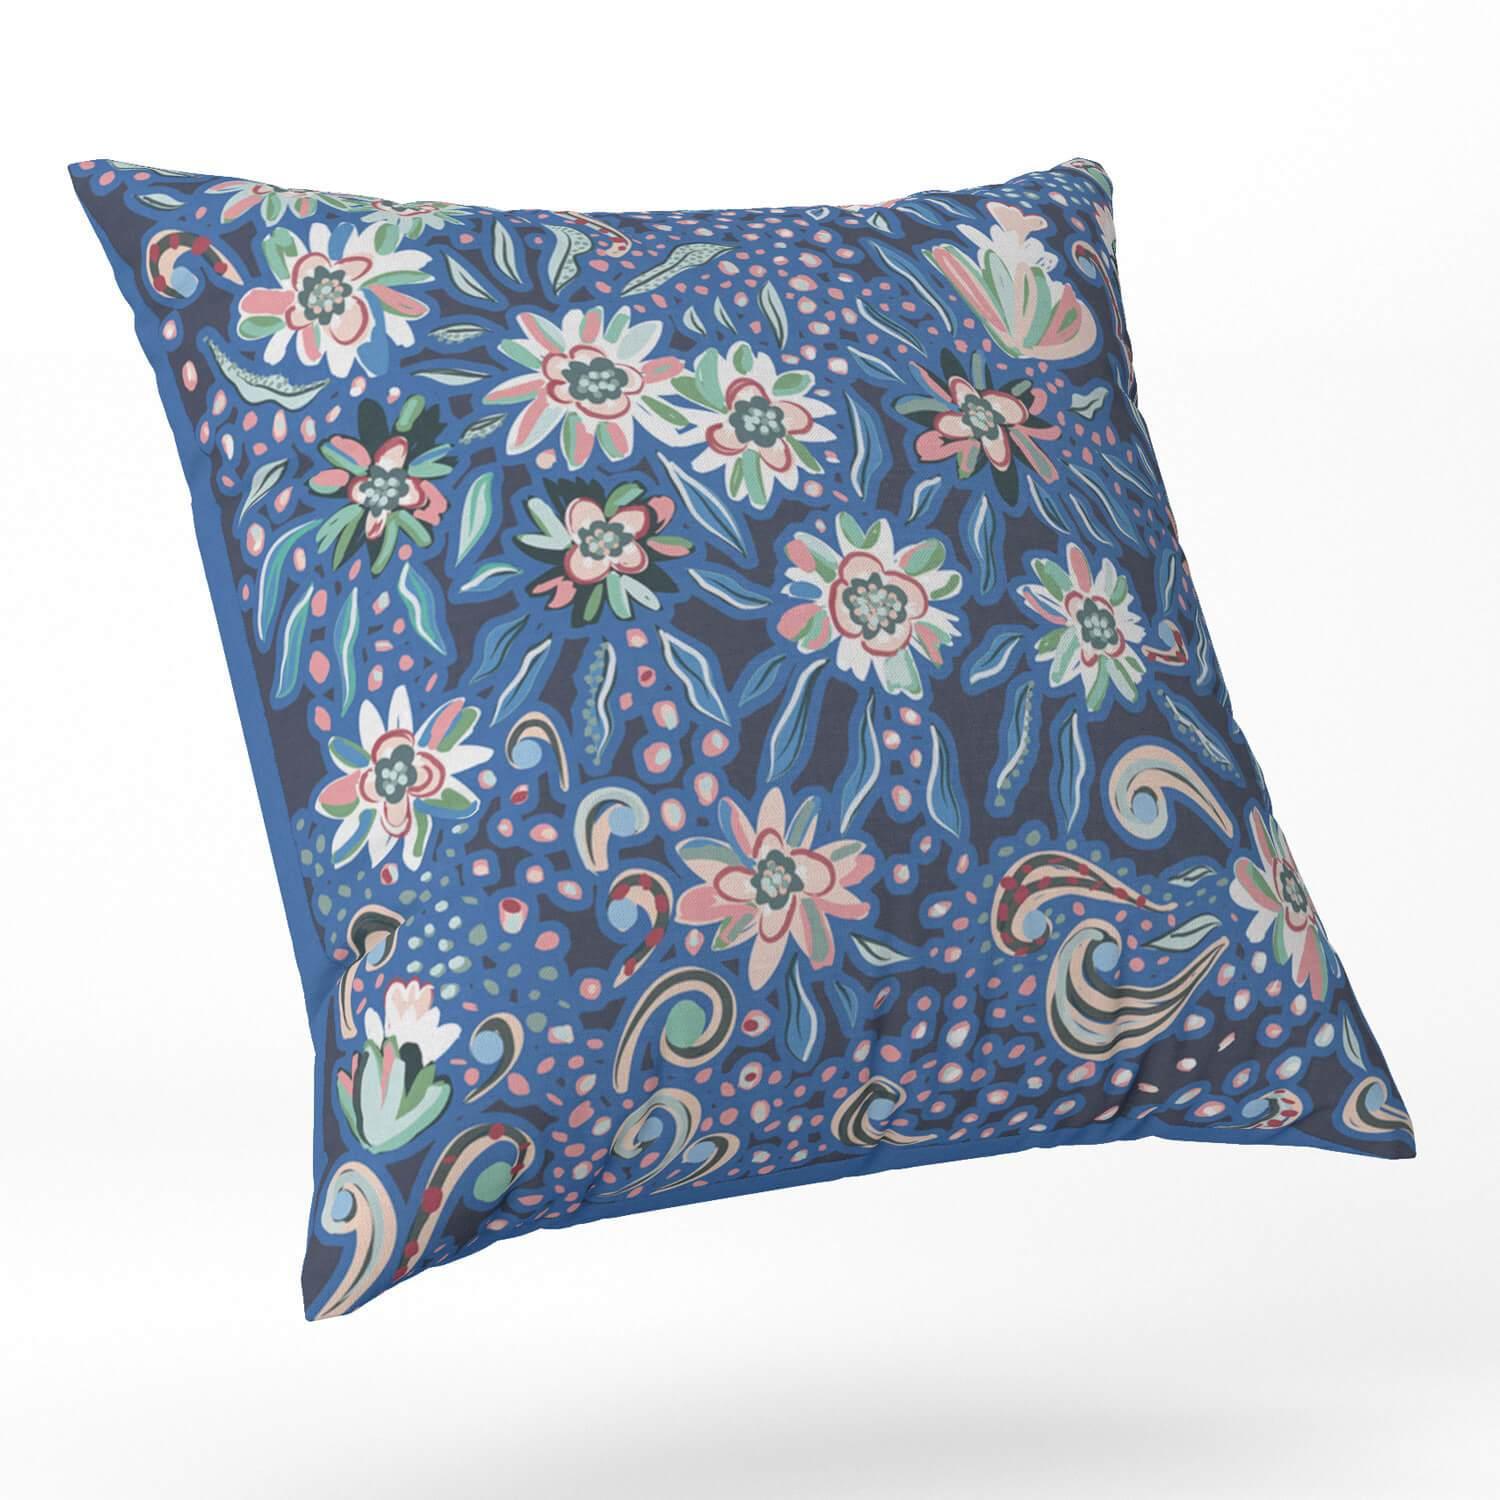 Indian Dreams ( Blue) - Funky Art Cushion - Bellissima - House Of Turnowsky Pillows - Handmade Cushions UK - WeLoveCushions